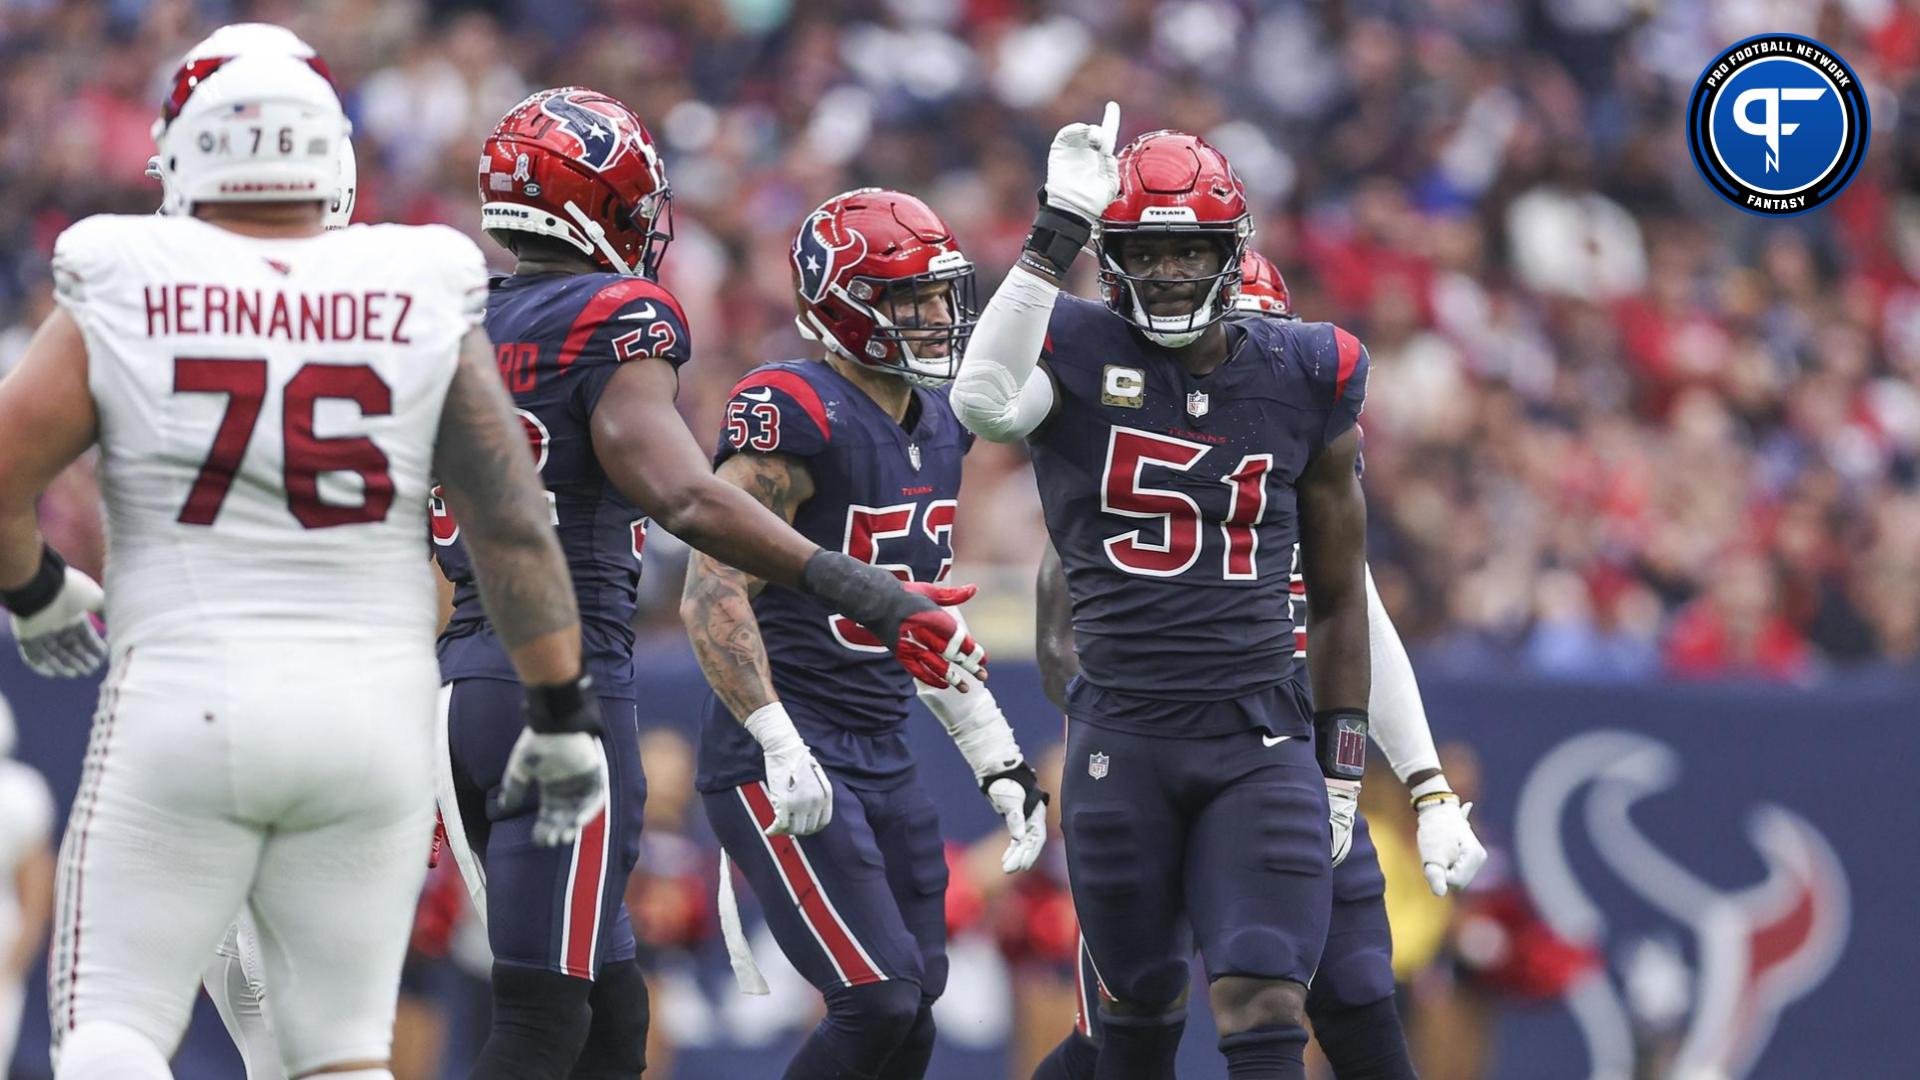 Houston Texans defensive end Will Anderson Jr. (51) reacts after making a tackle during the fourth quarter against the Arizona Cardinals at NRG Stadium.